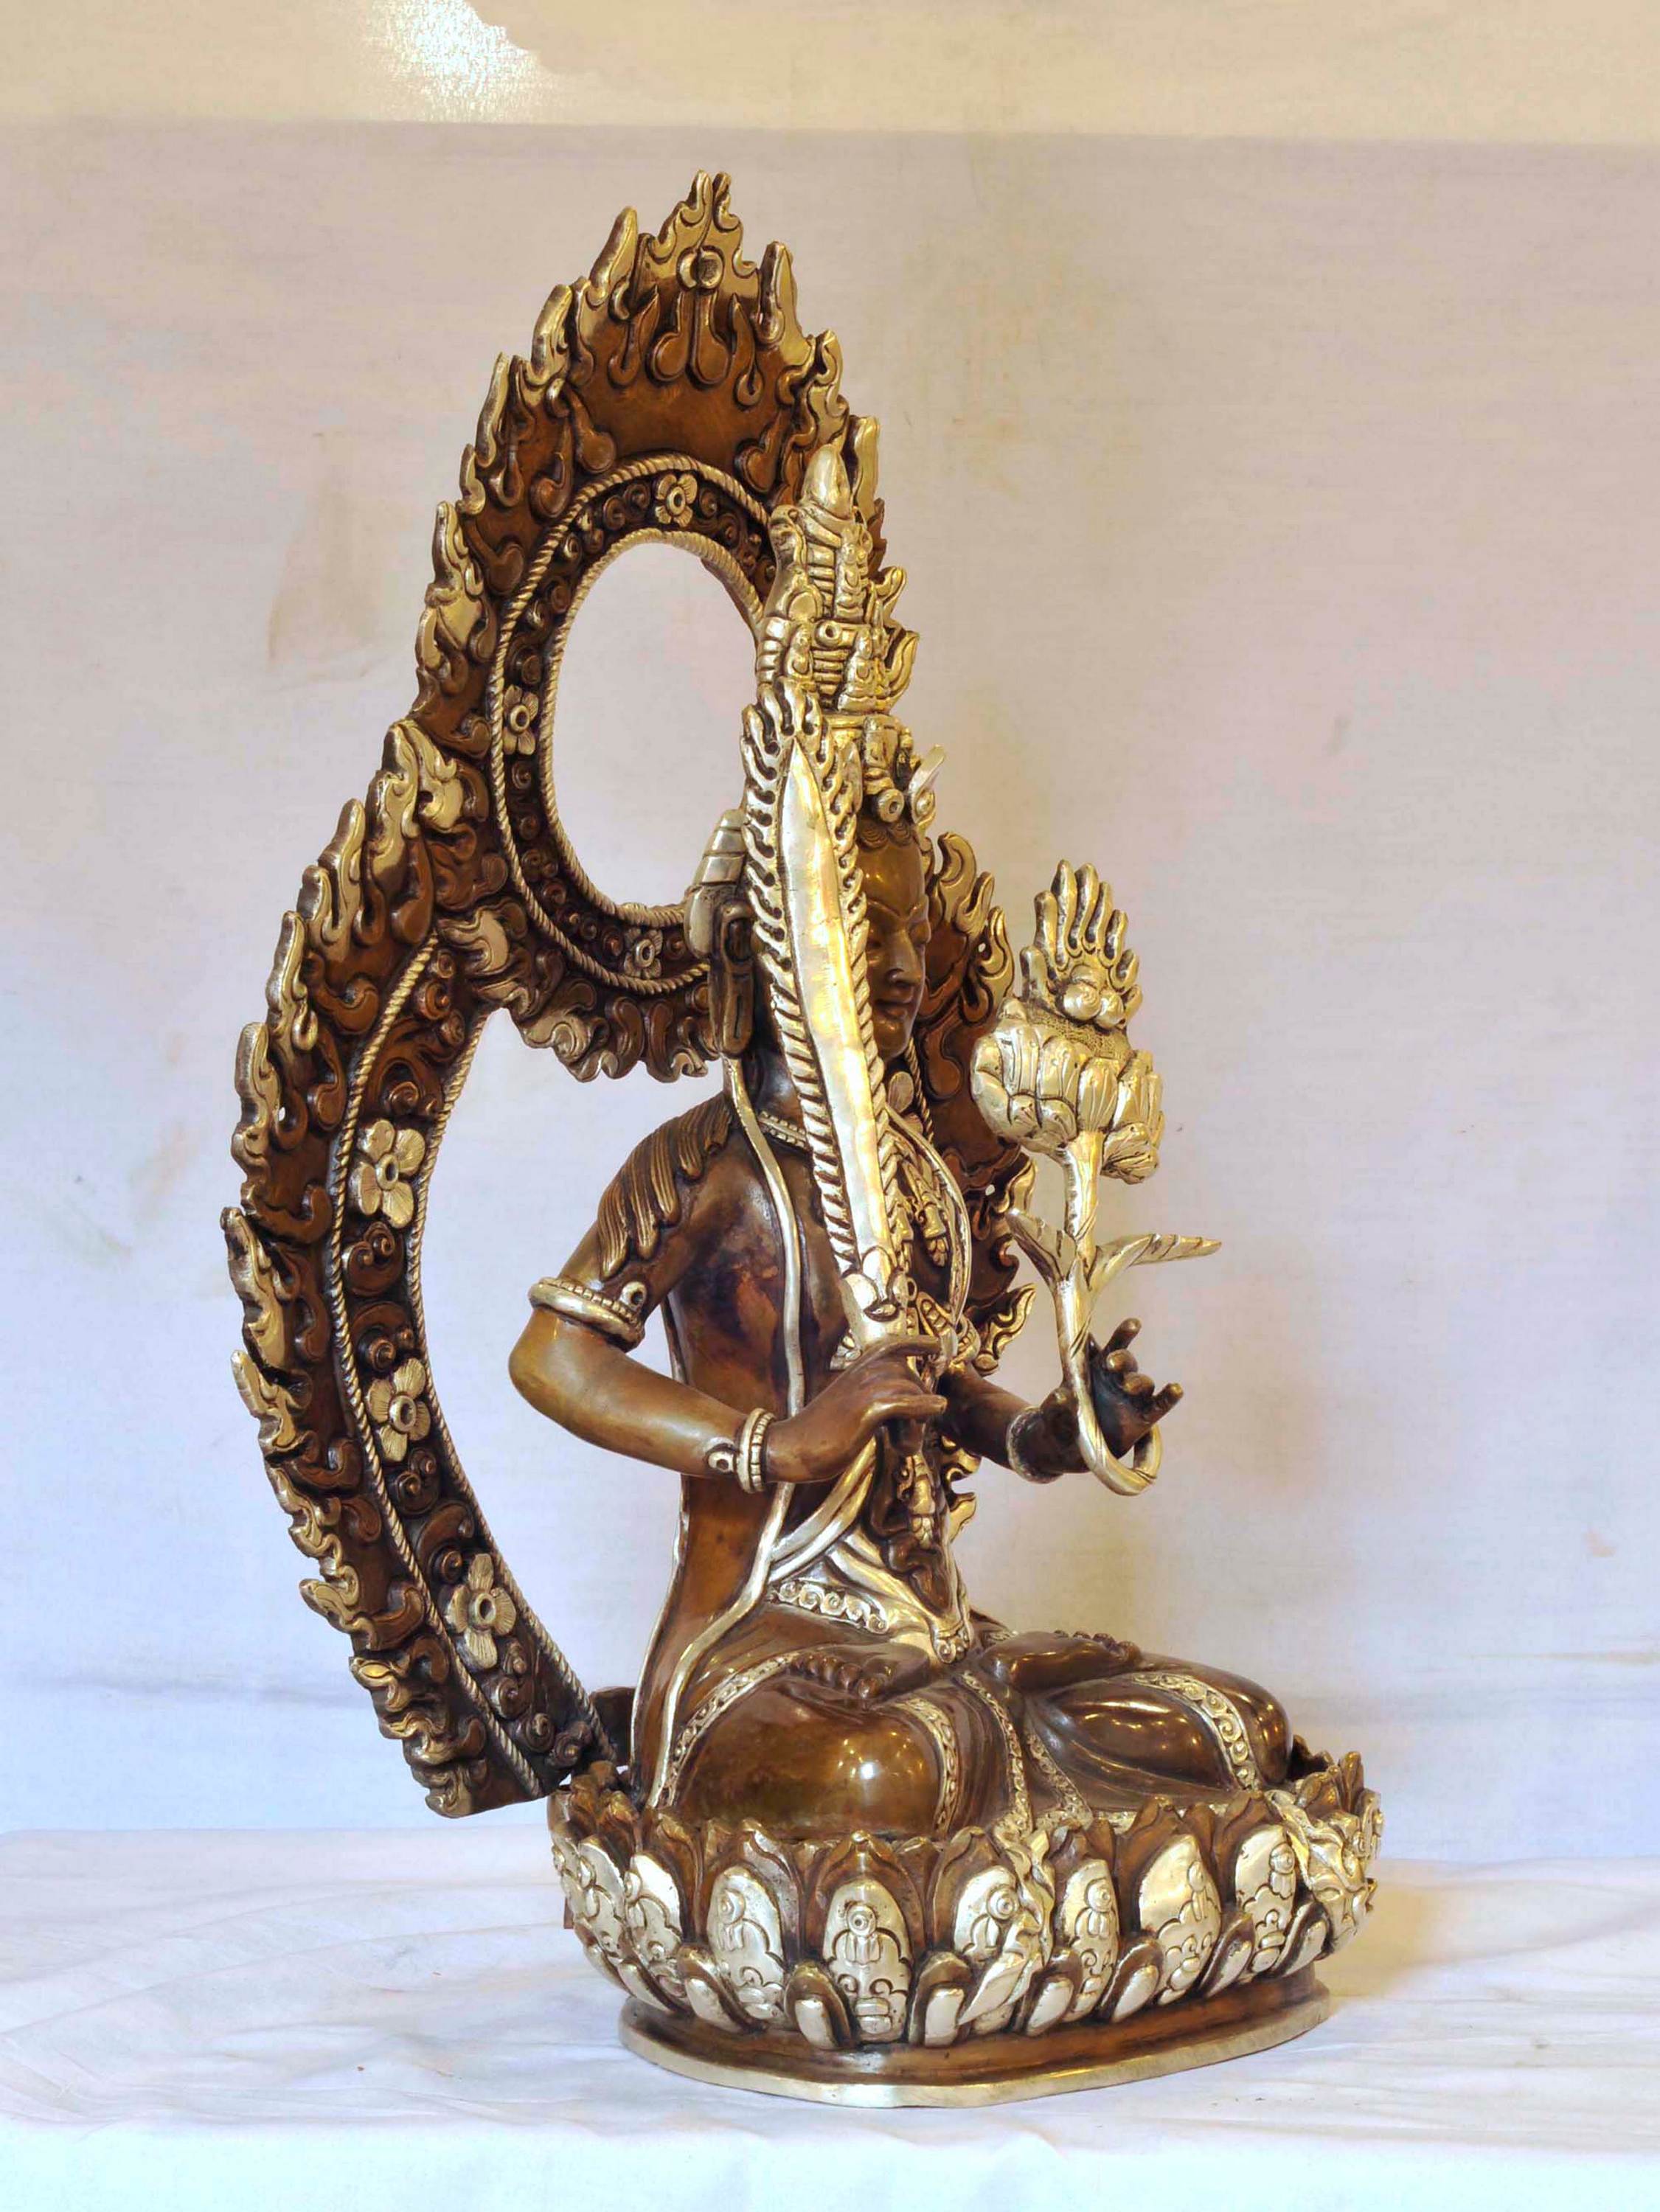 Buddhist Handmade Statue Of name Not Sure, silver And Chocolate Oxidized